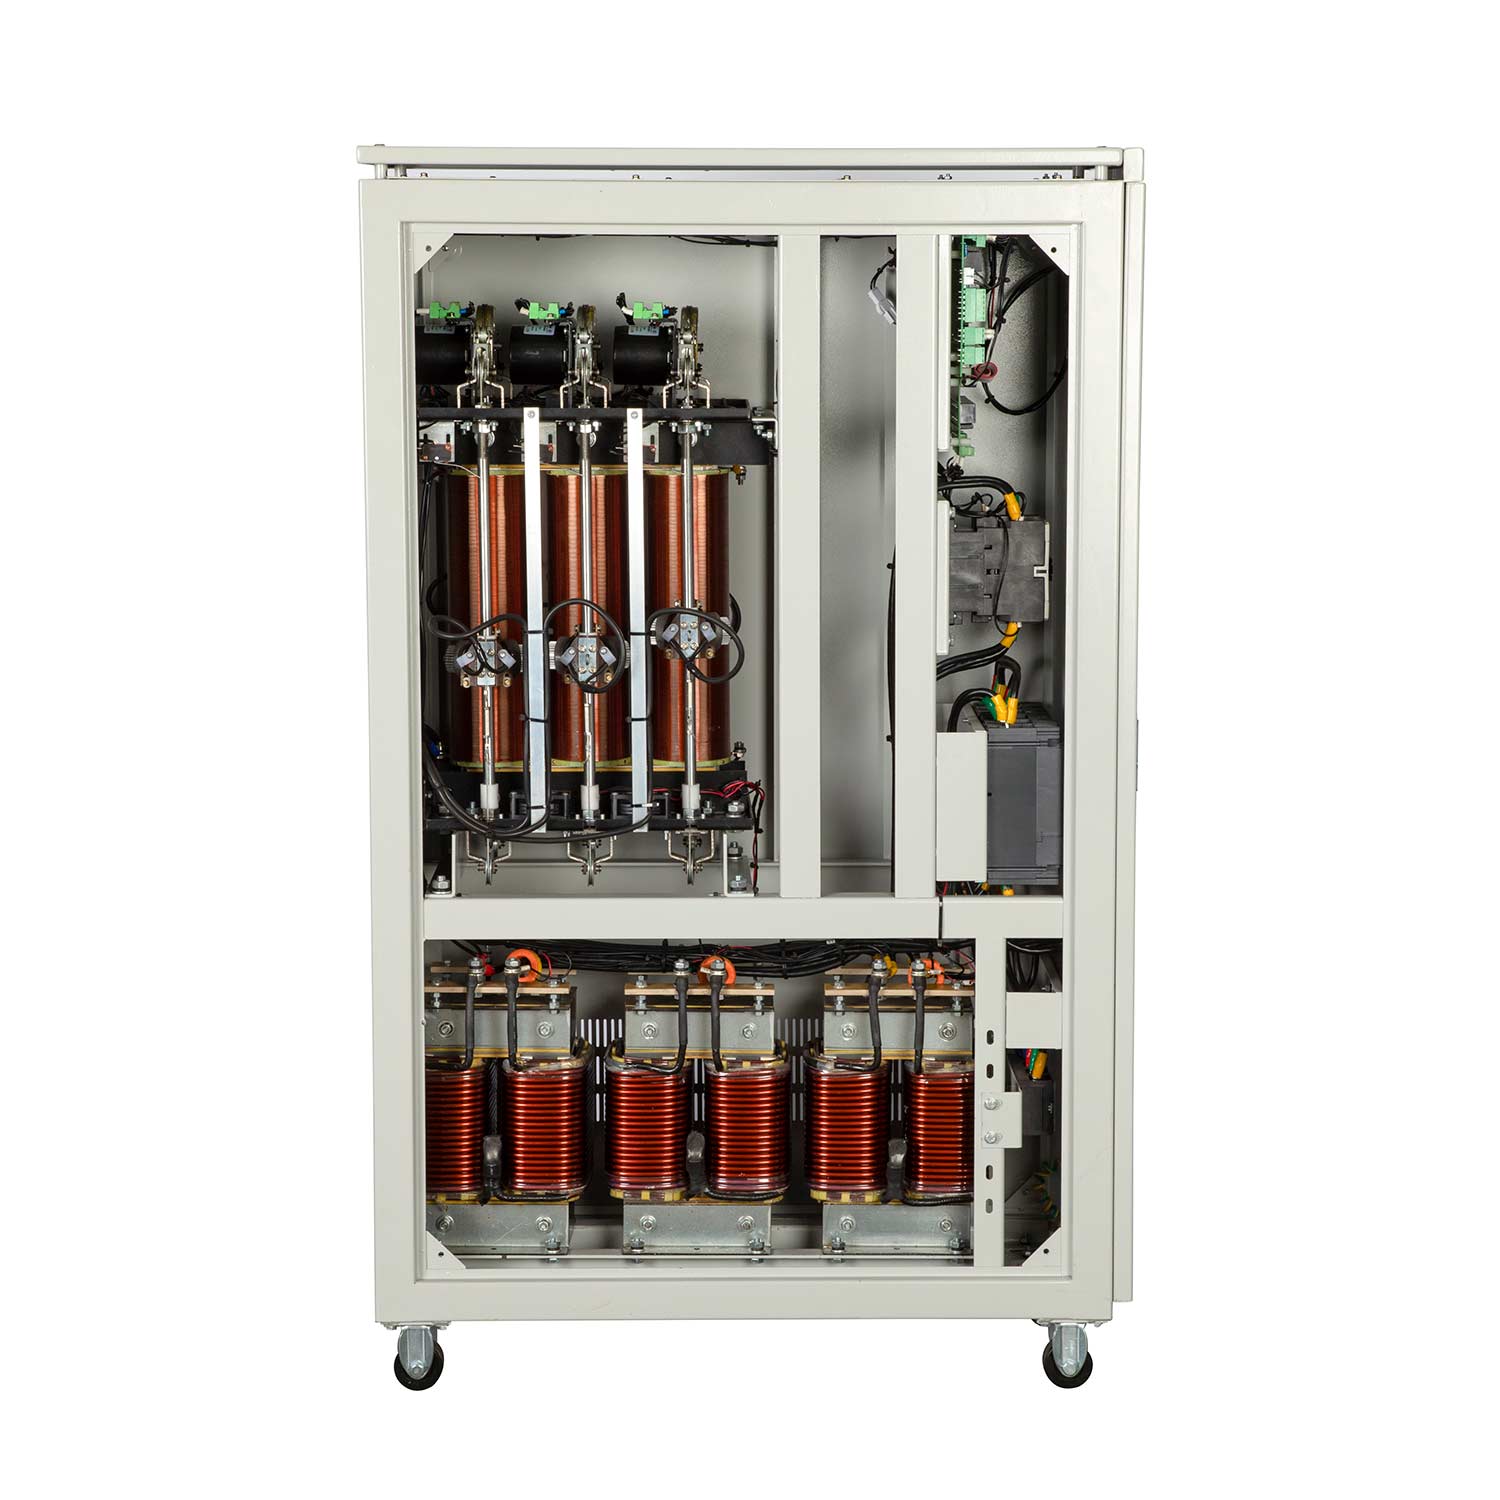 4000 kVA 3 Phase Automatic Voltage Stabilizer